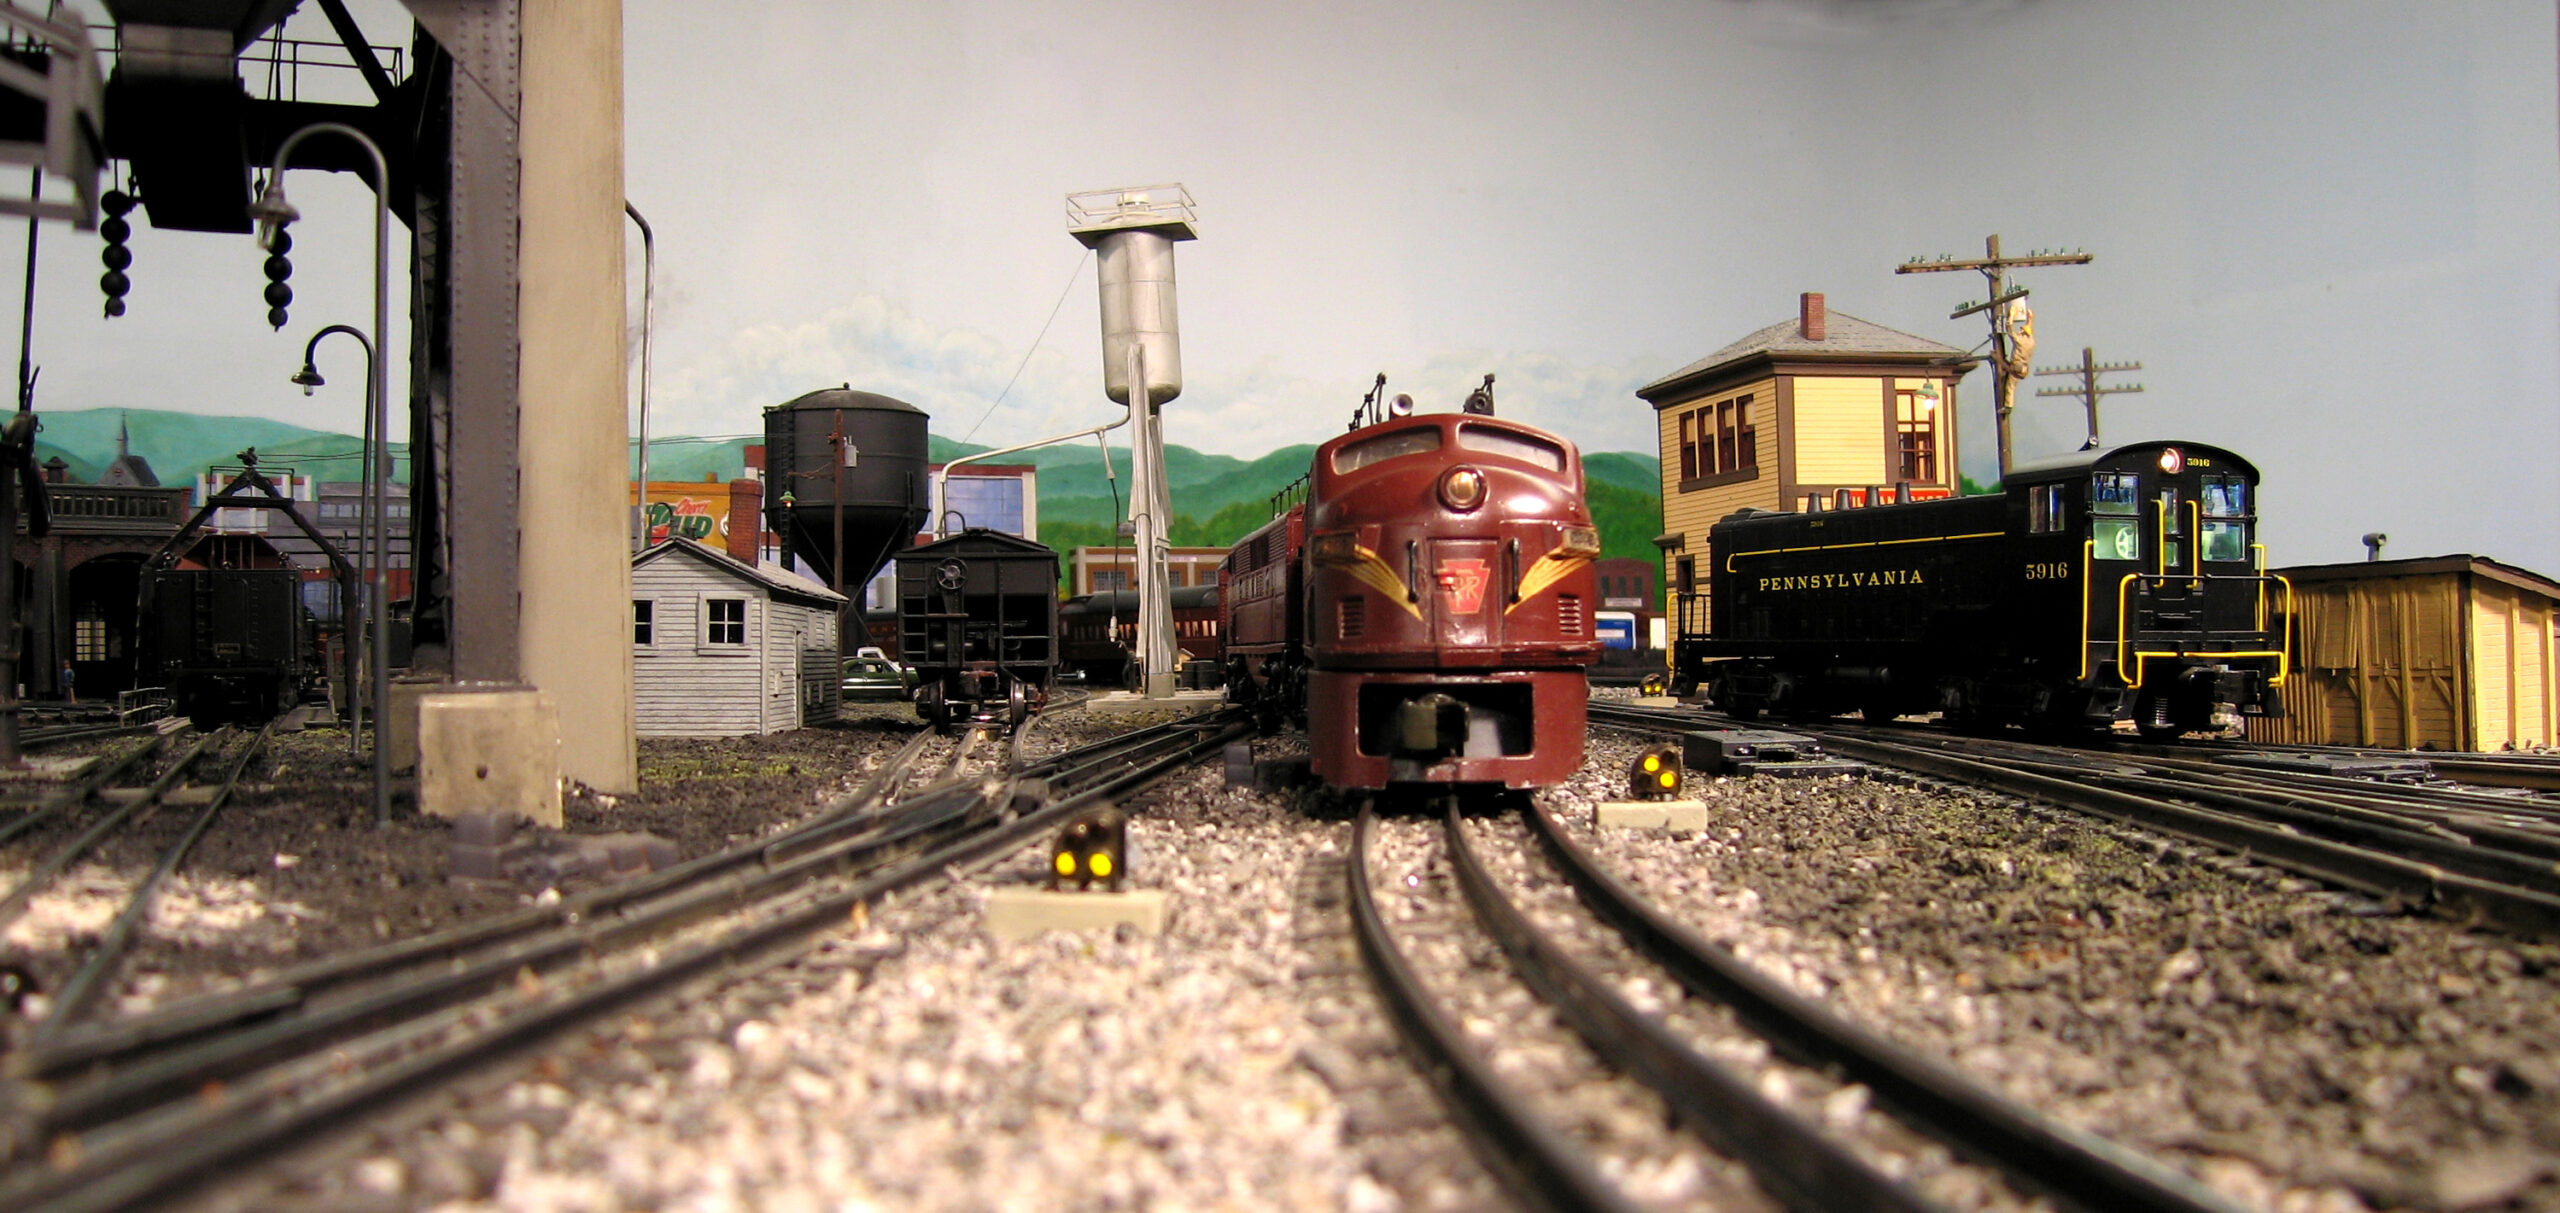 Locomotives near fueling facility and switch tower.